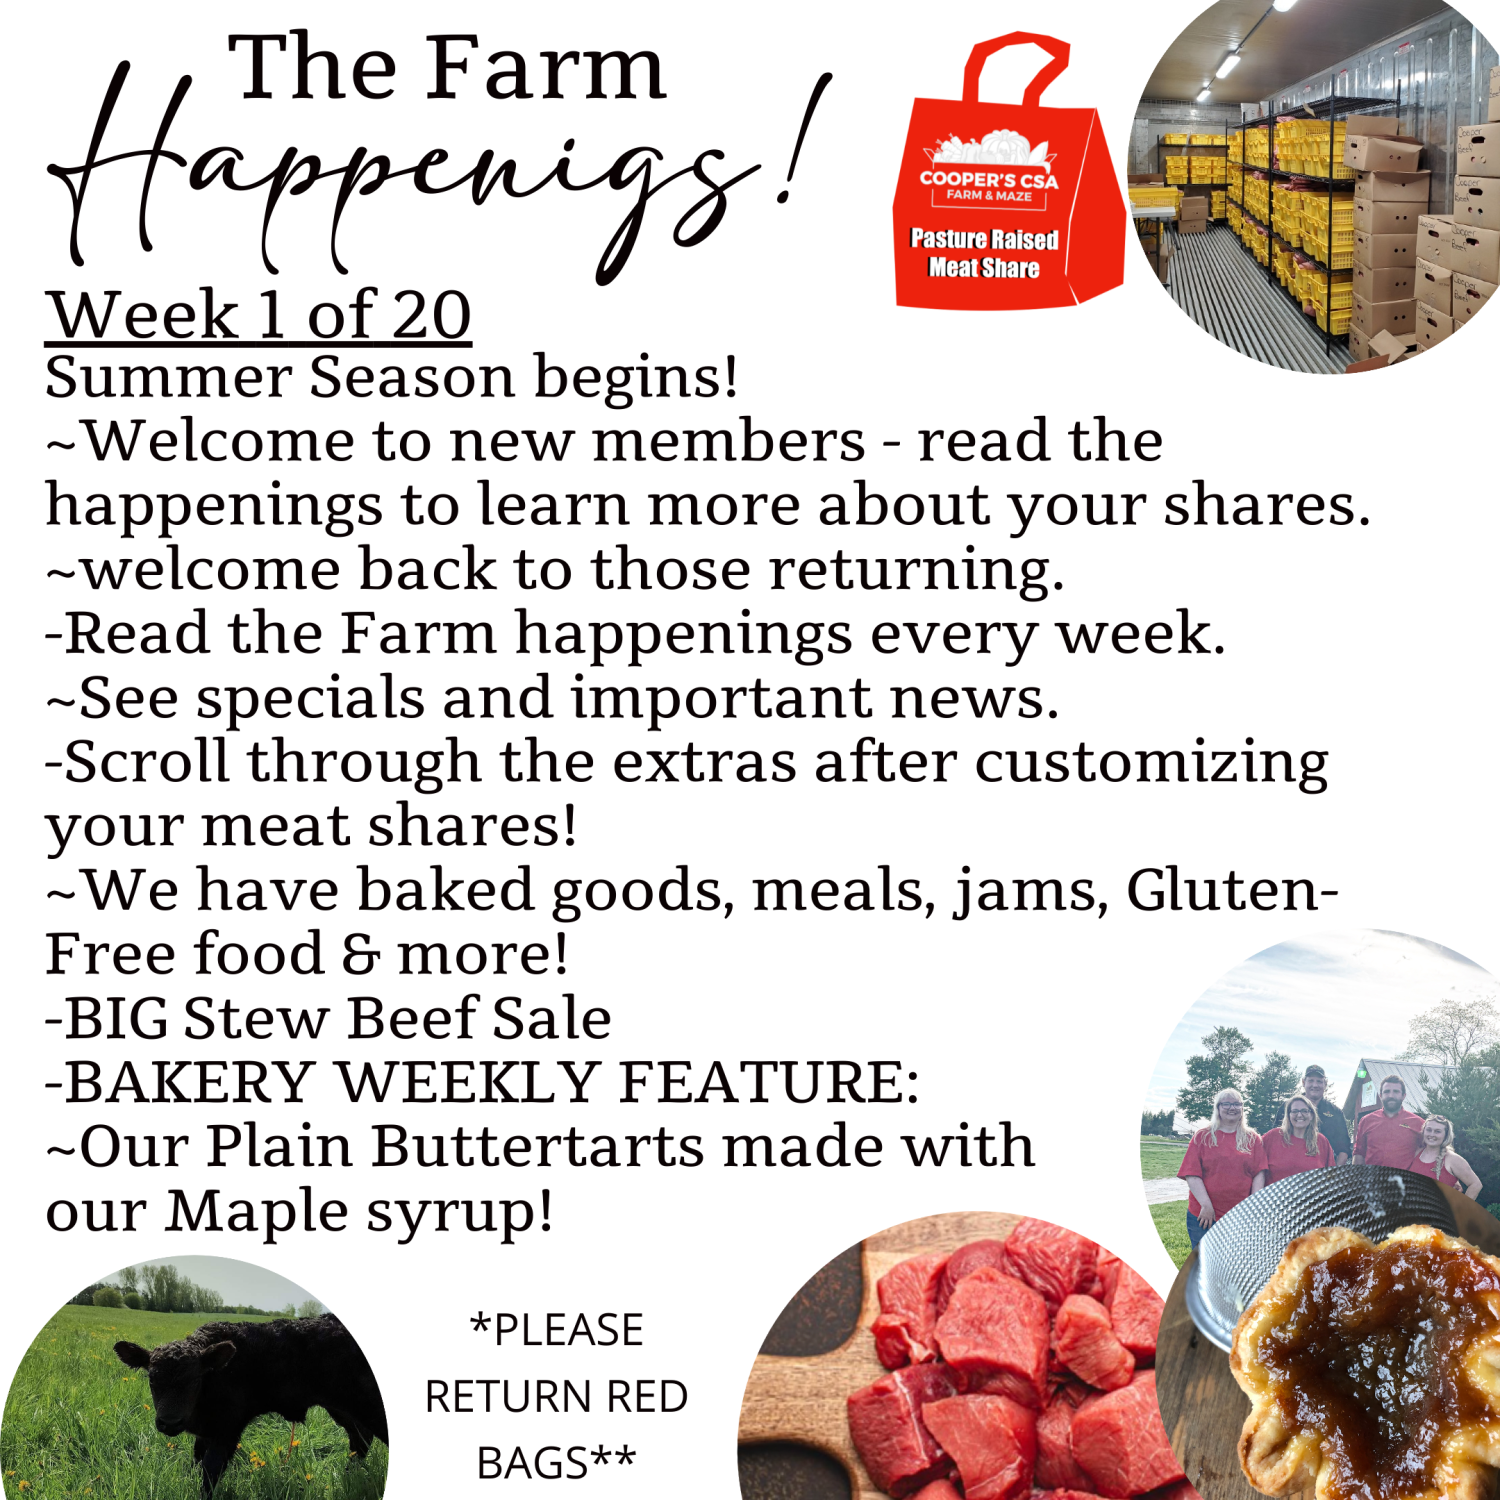 Previous Happening: "Pasture Meat Shares"-Coopers CSA Farm Farm Happenings;Week 1 of 20